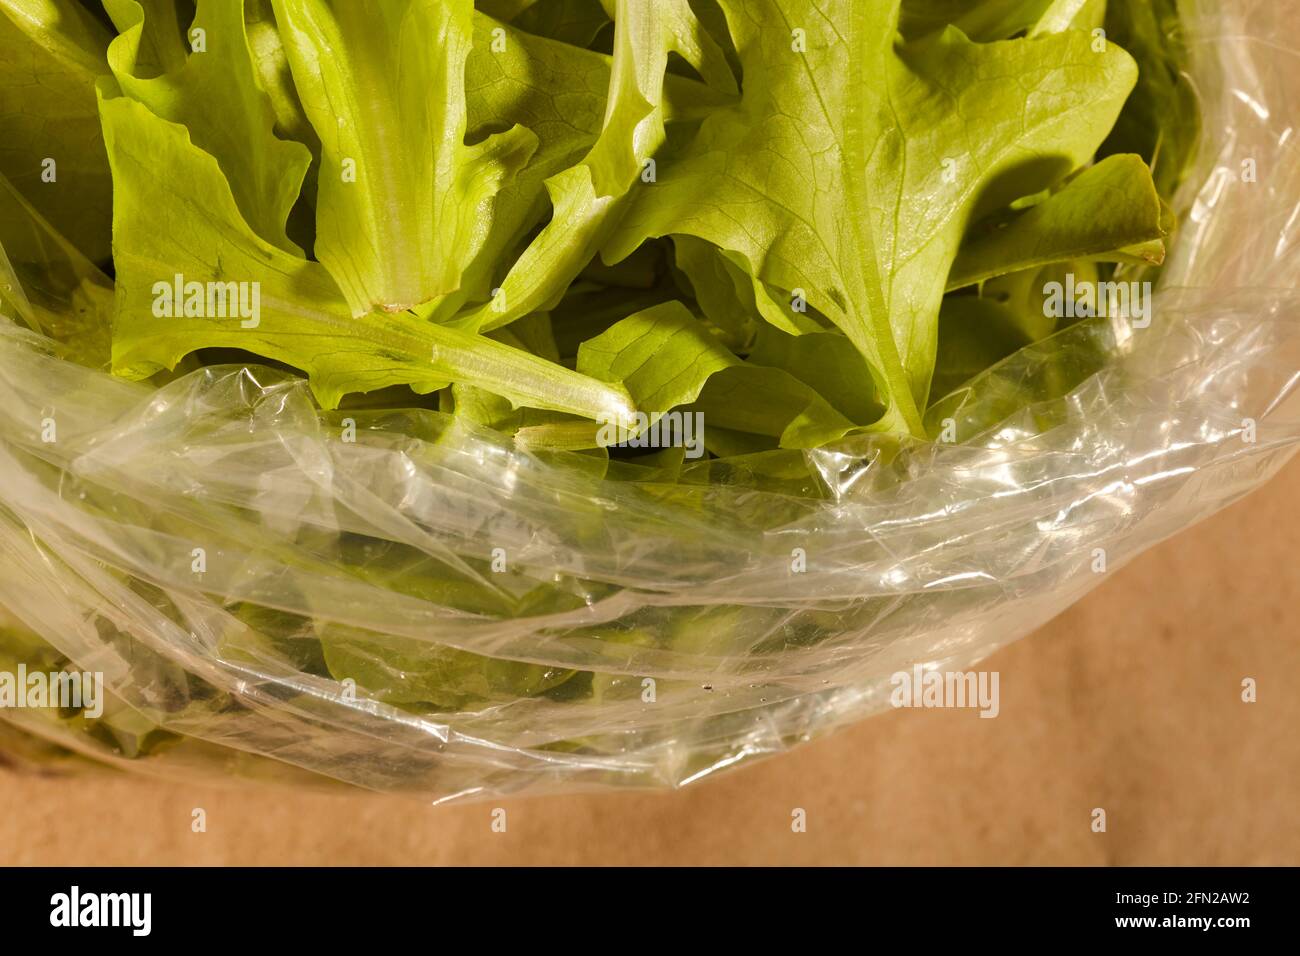 Cut lettuce in a plastic bag, the way it's sold in Amish farm markets in Lancaster County, Pennsylvania. Cut lettuce is an Amish Spring seasonal speci Stock Photo